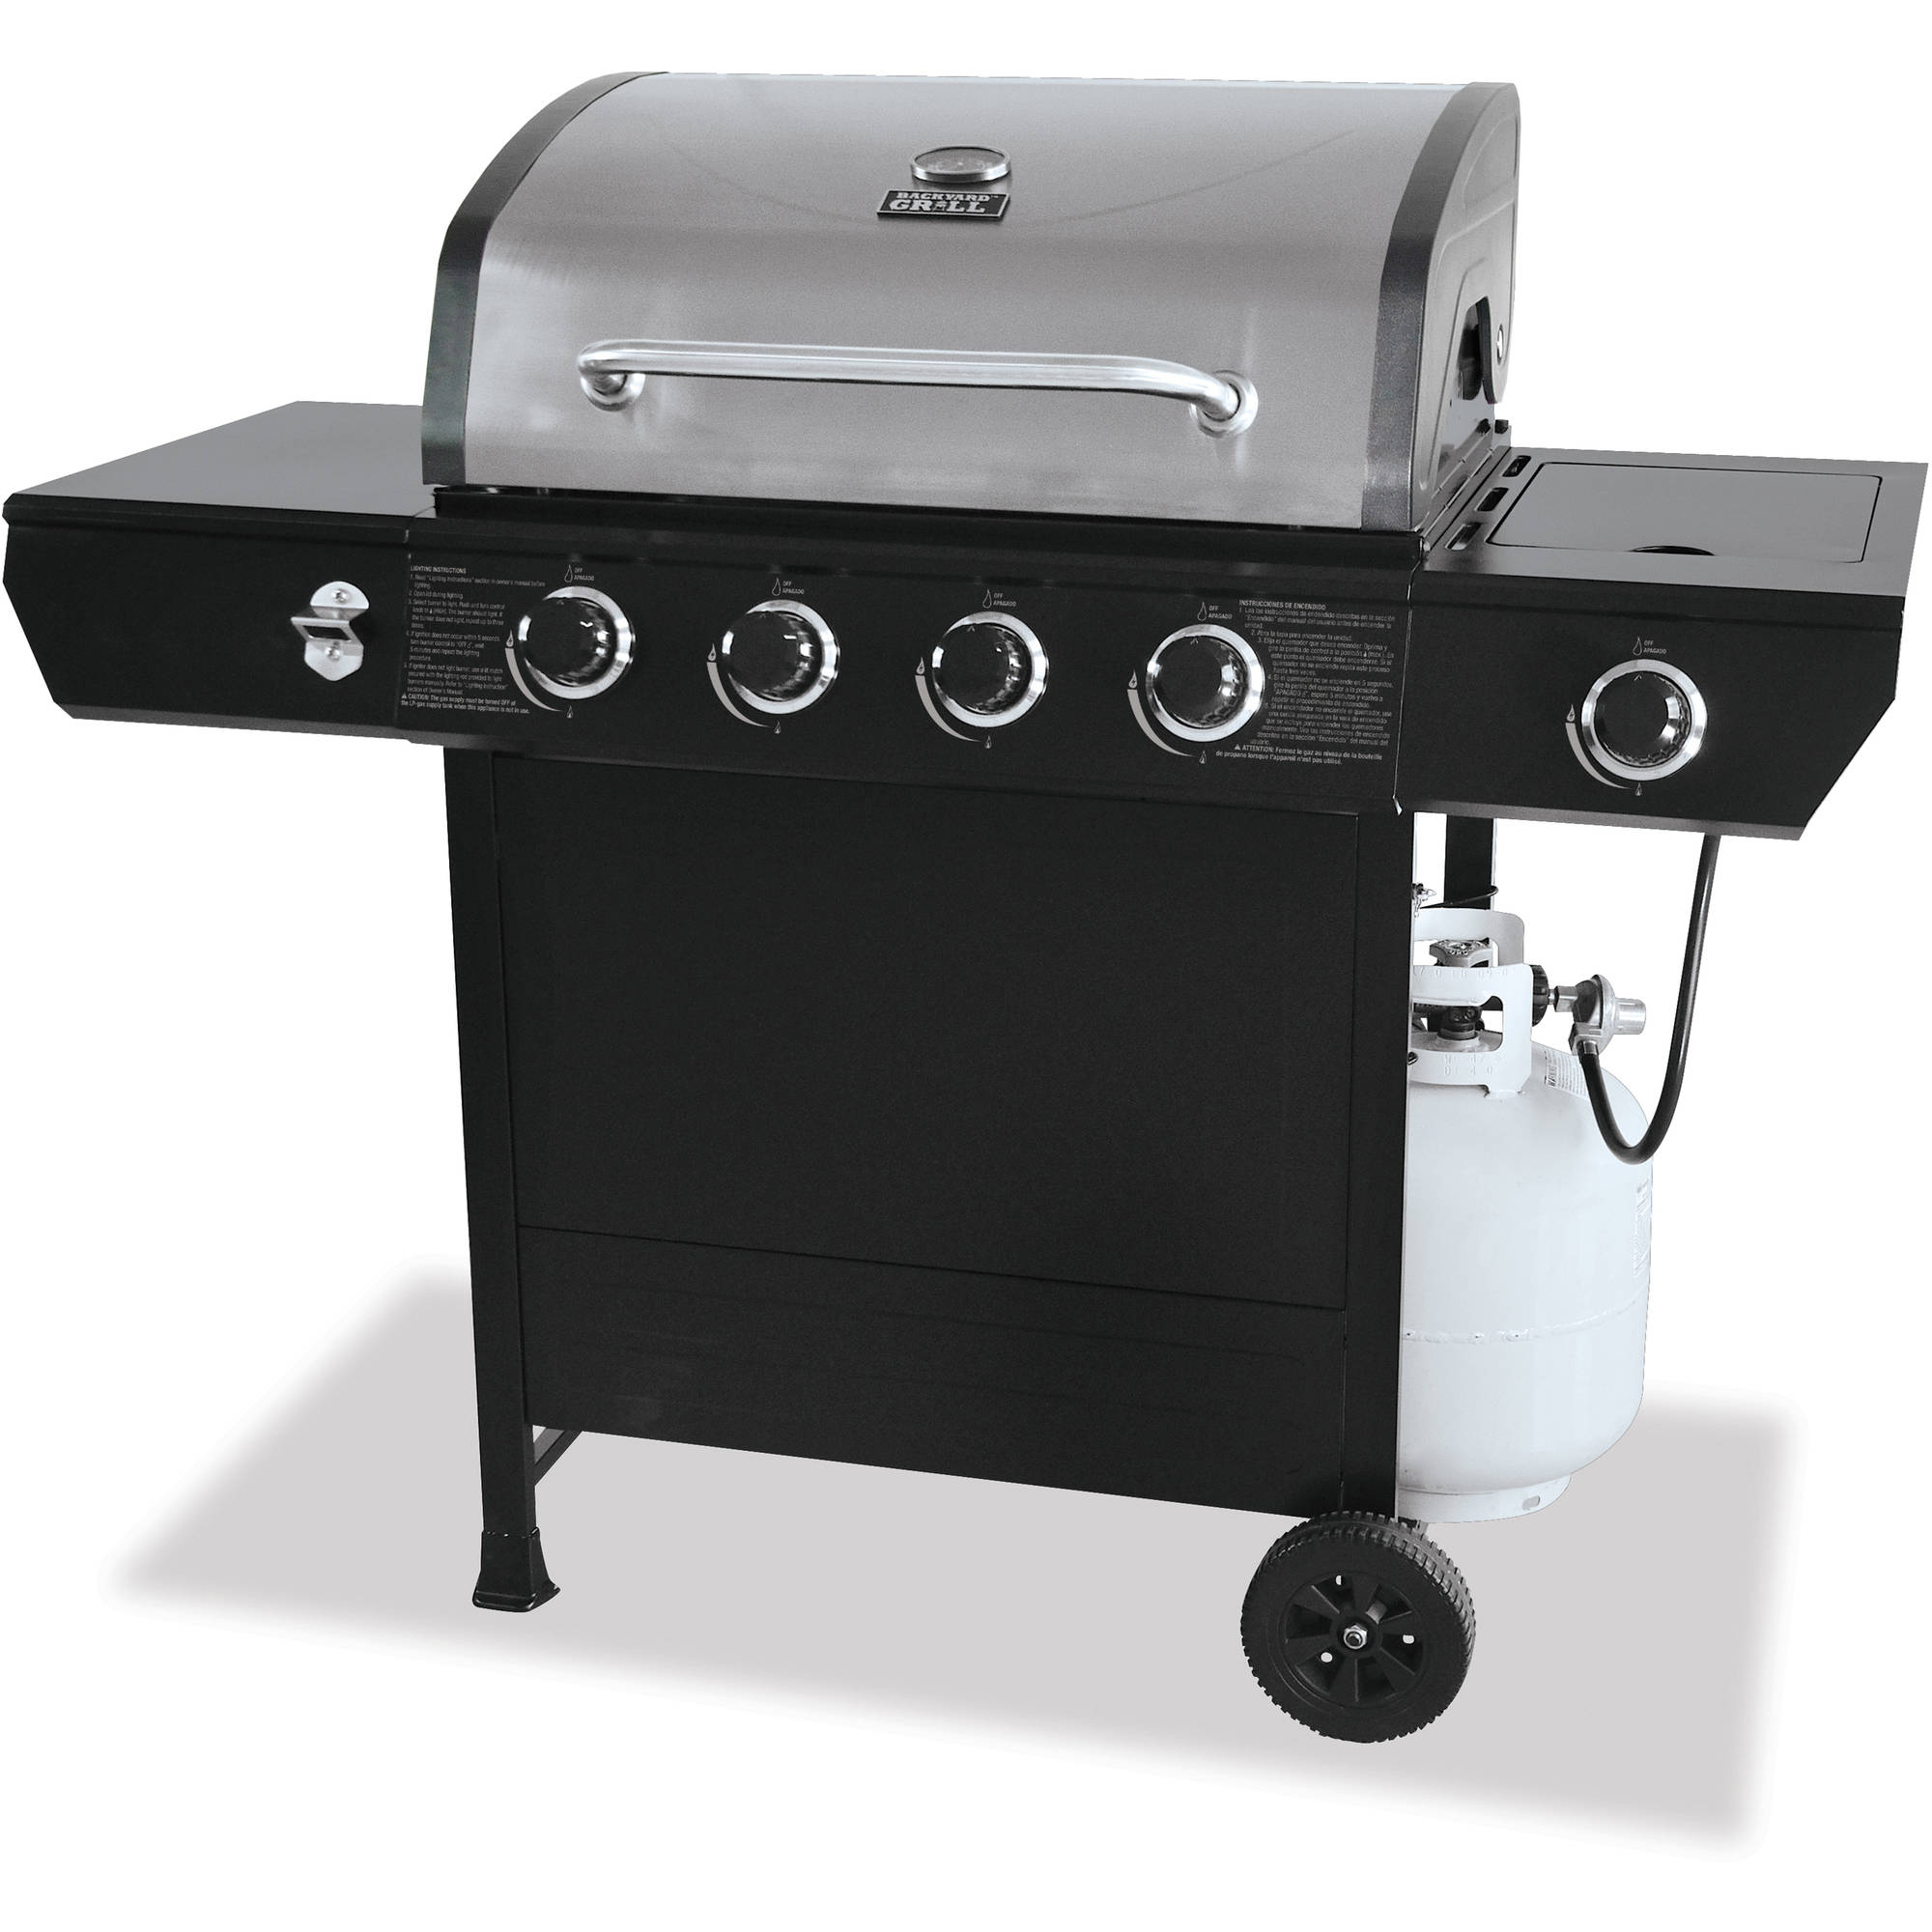 4 Burner Ss Gas Grill With Side - image 1 of 2